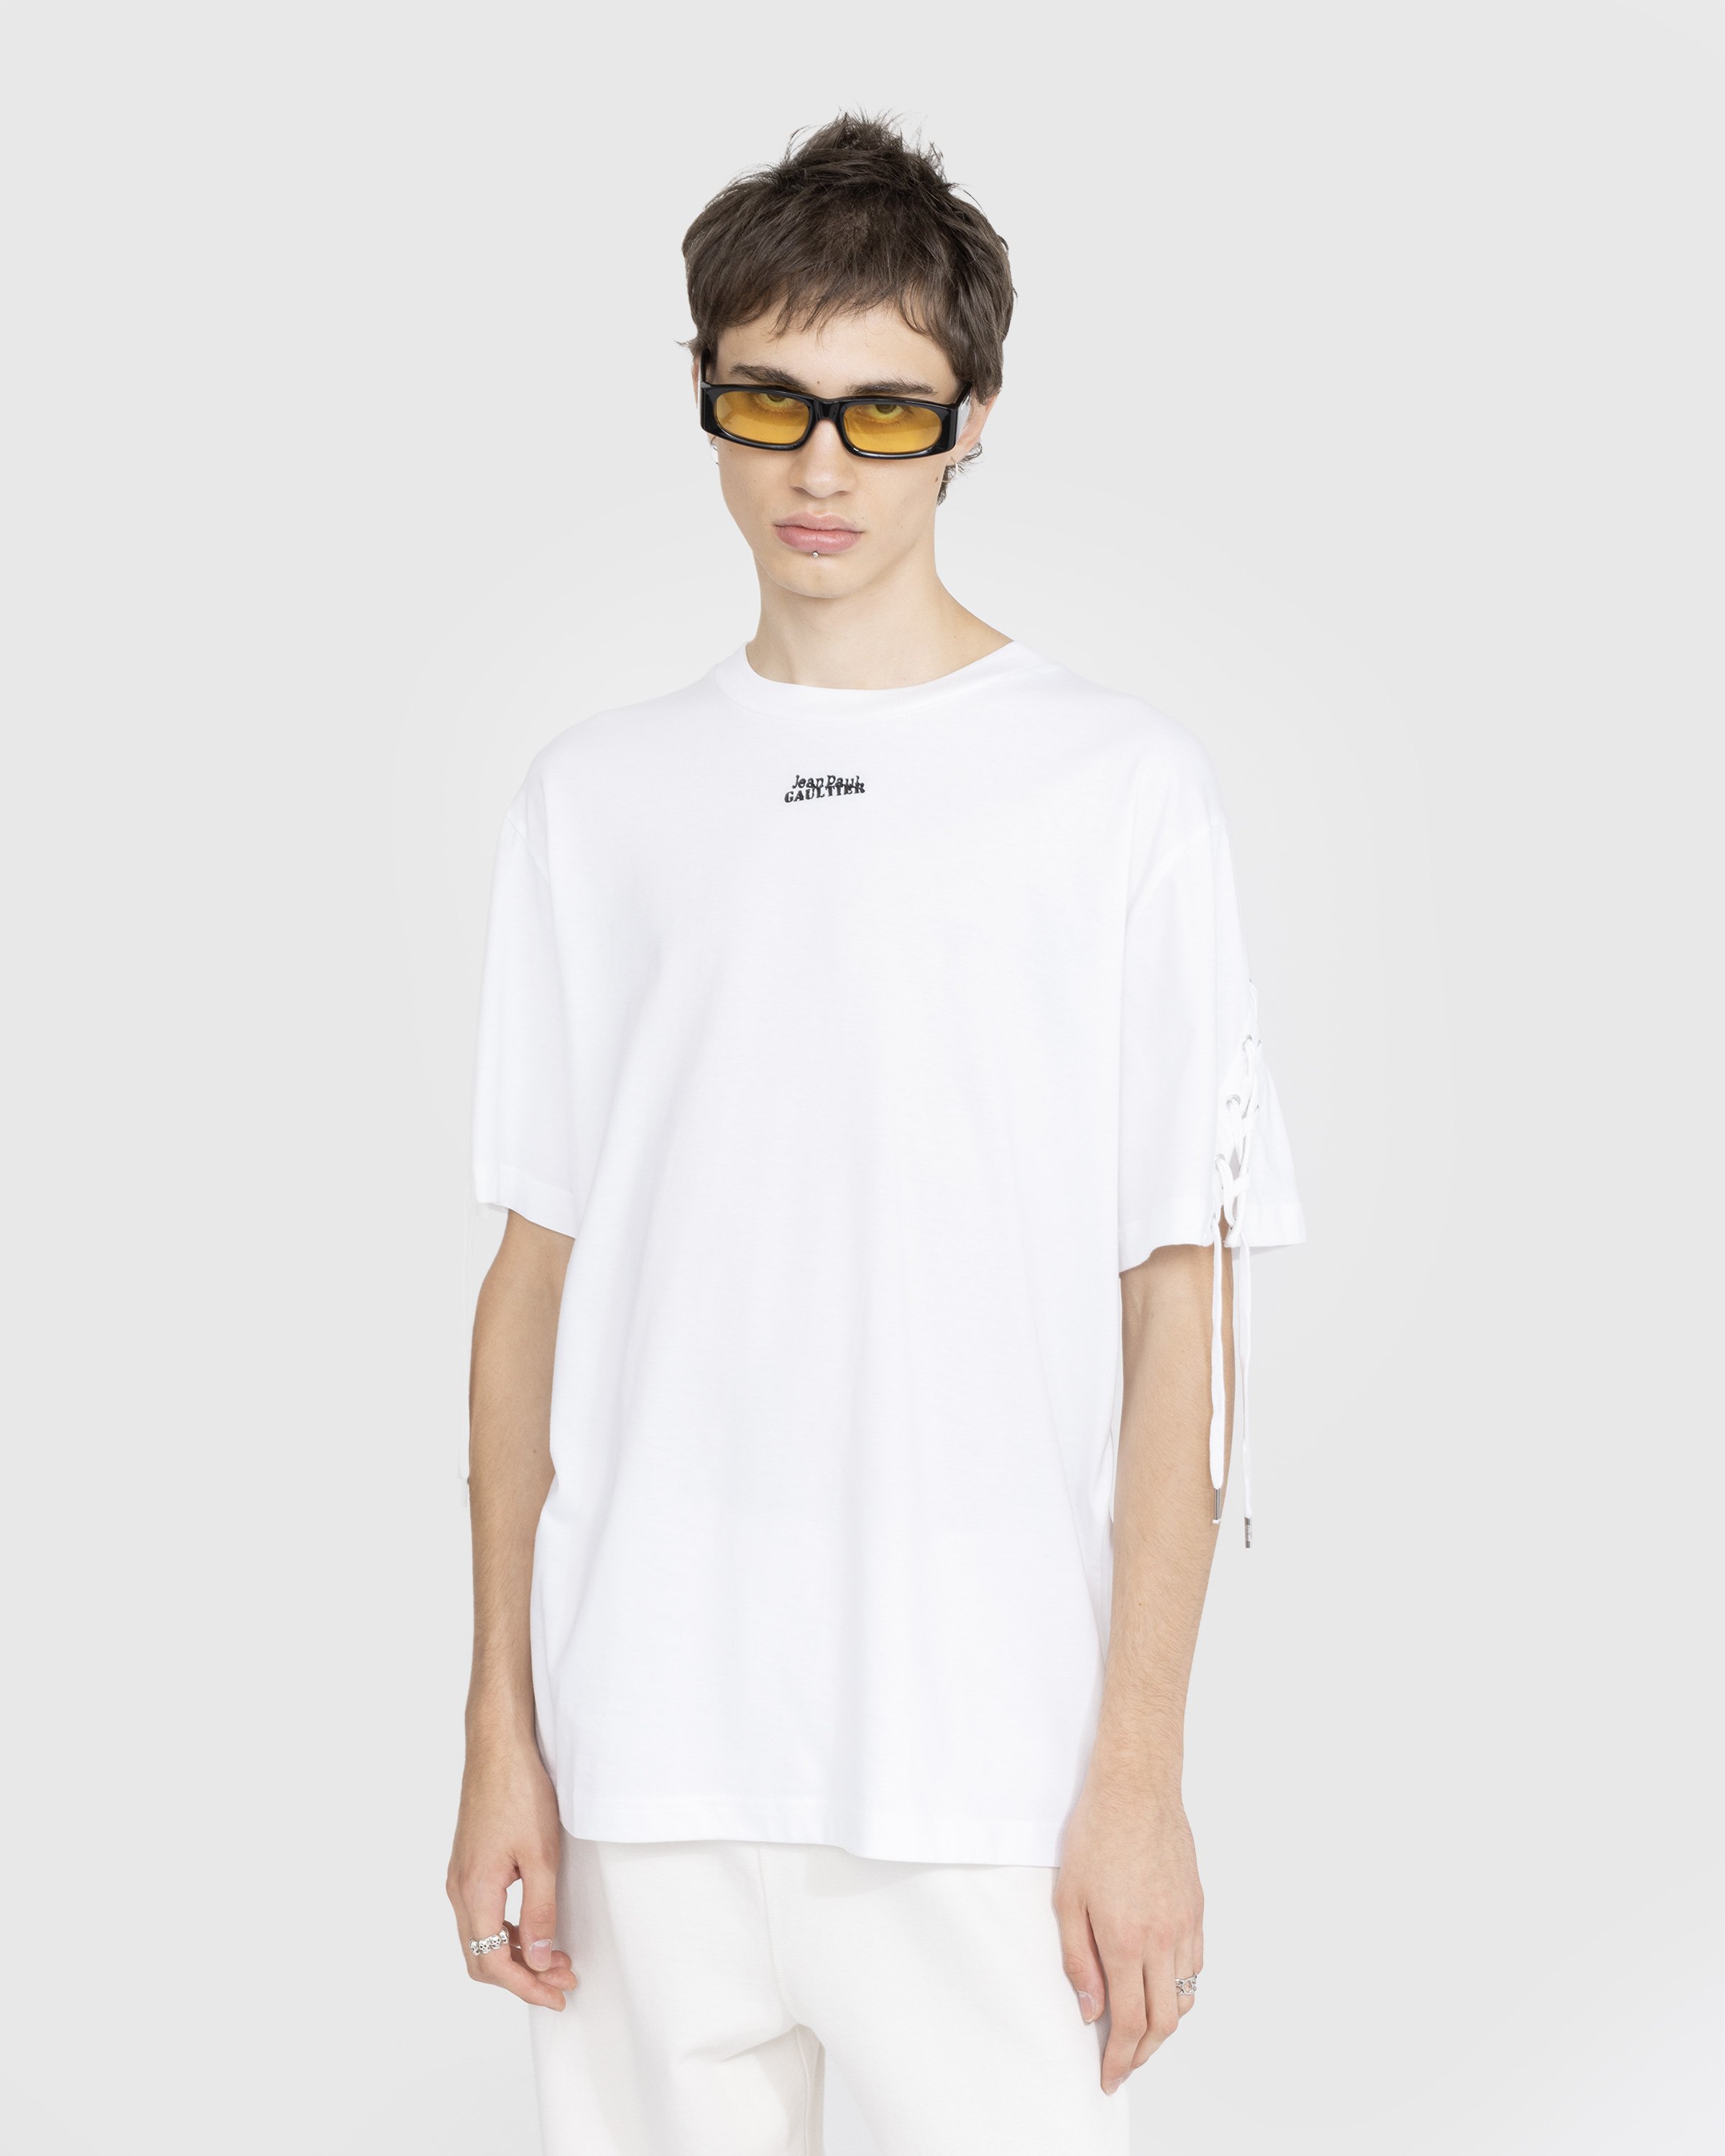 Jean Paul Gaultier - Oversize Laced T-Shirt White - Clothing - White - Image 2